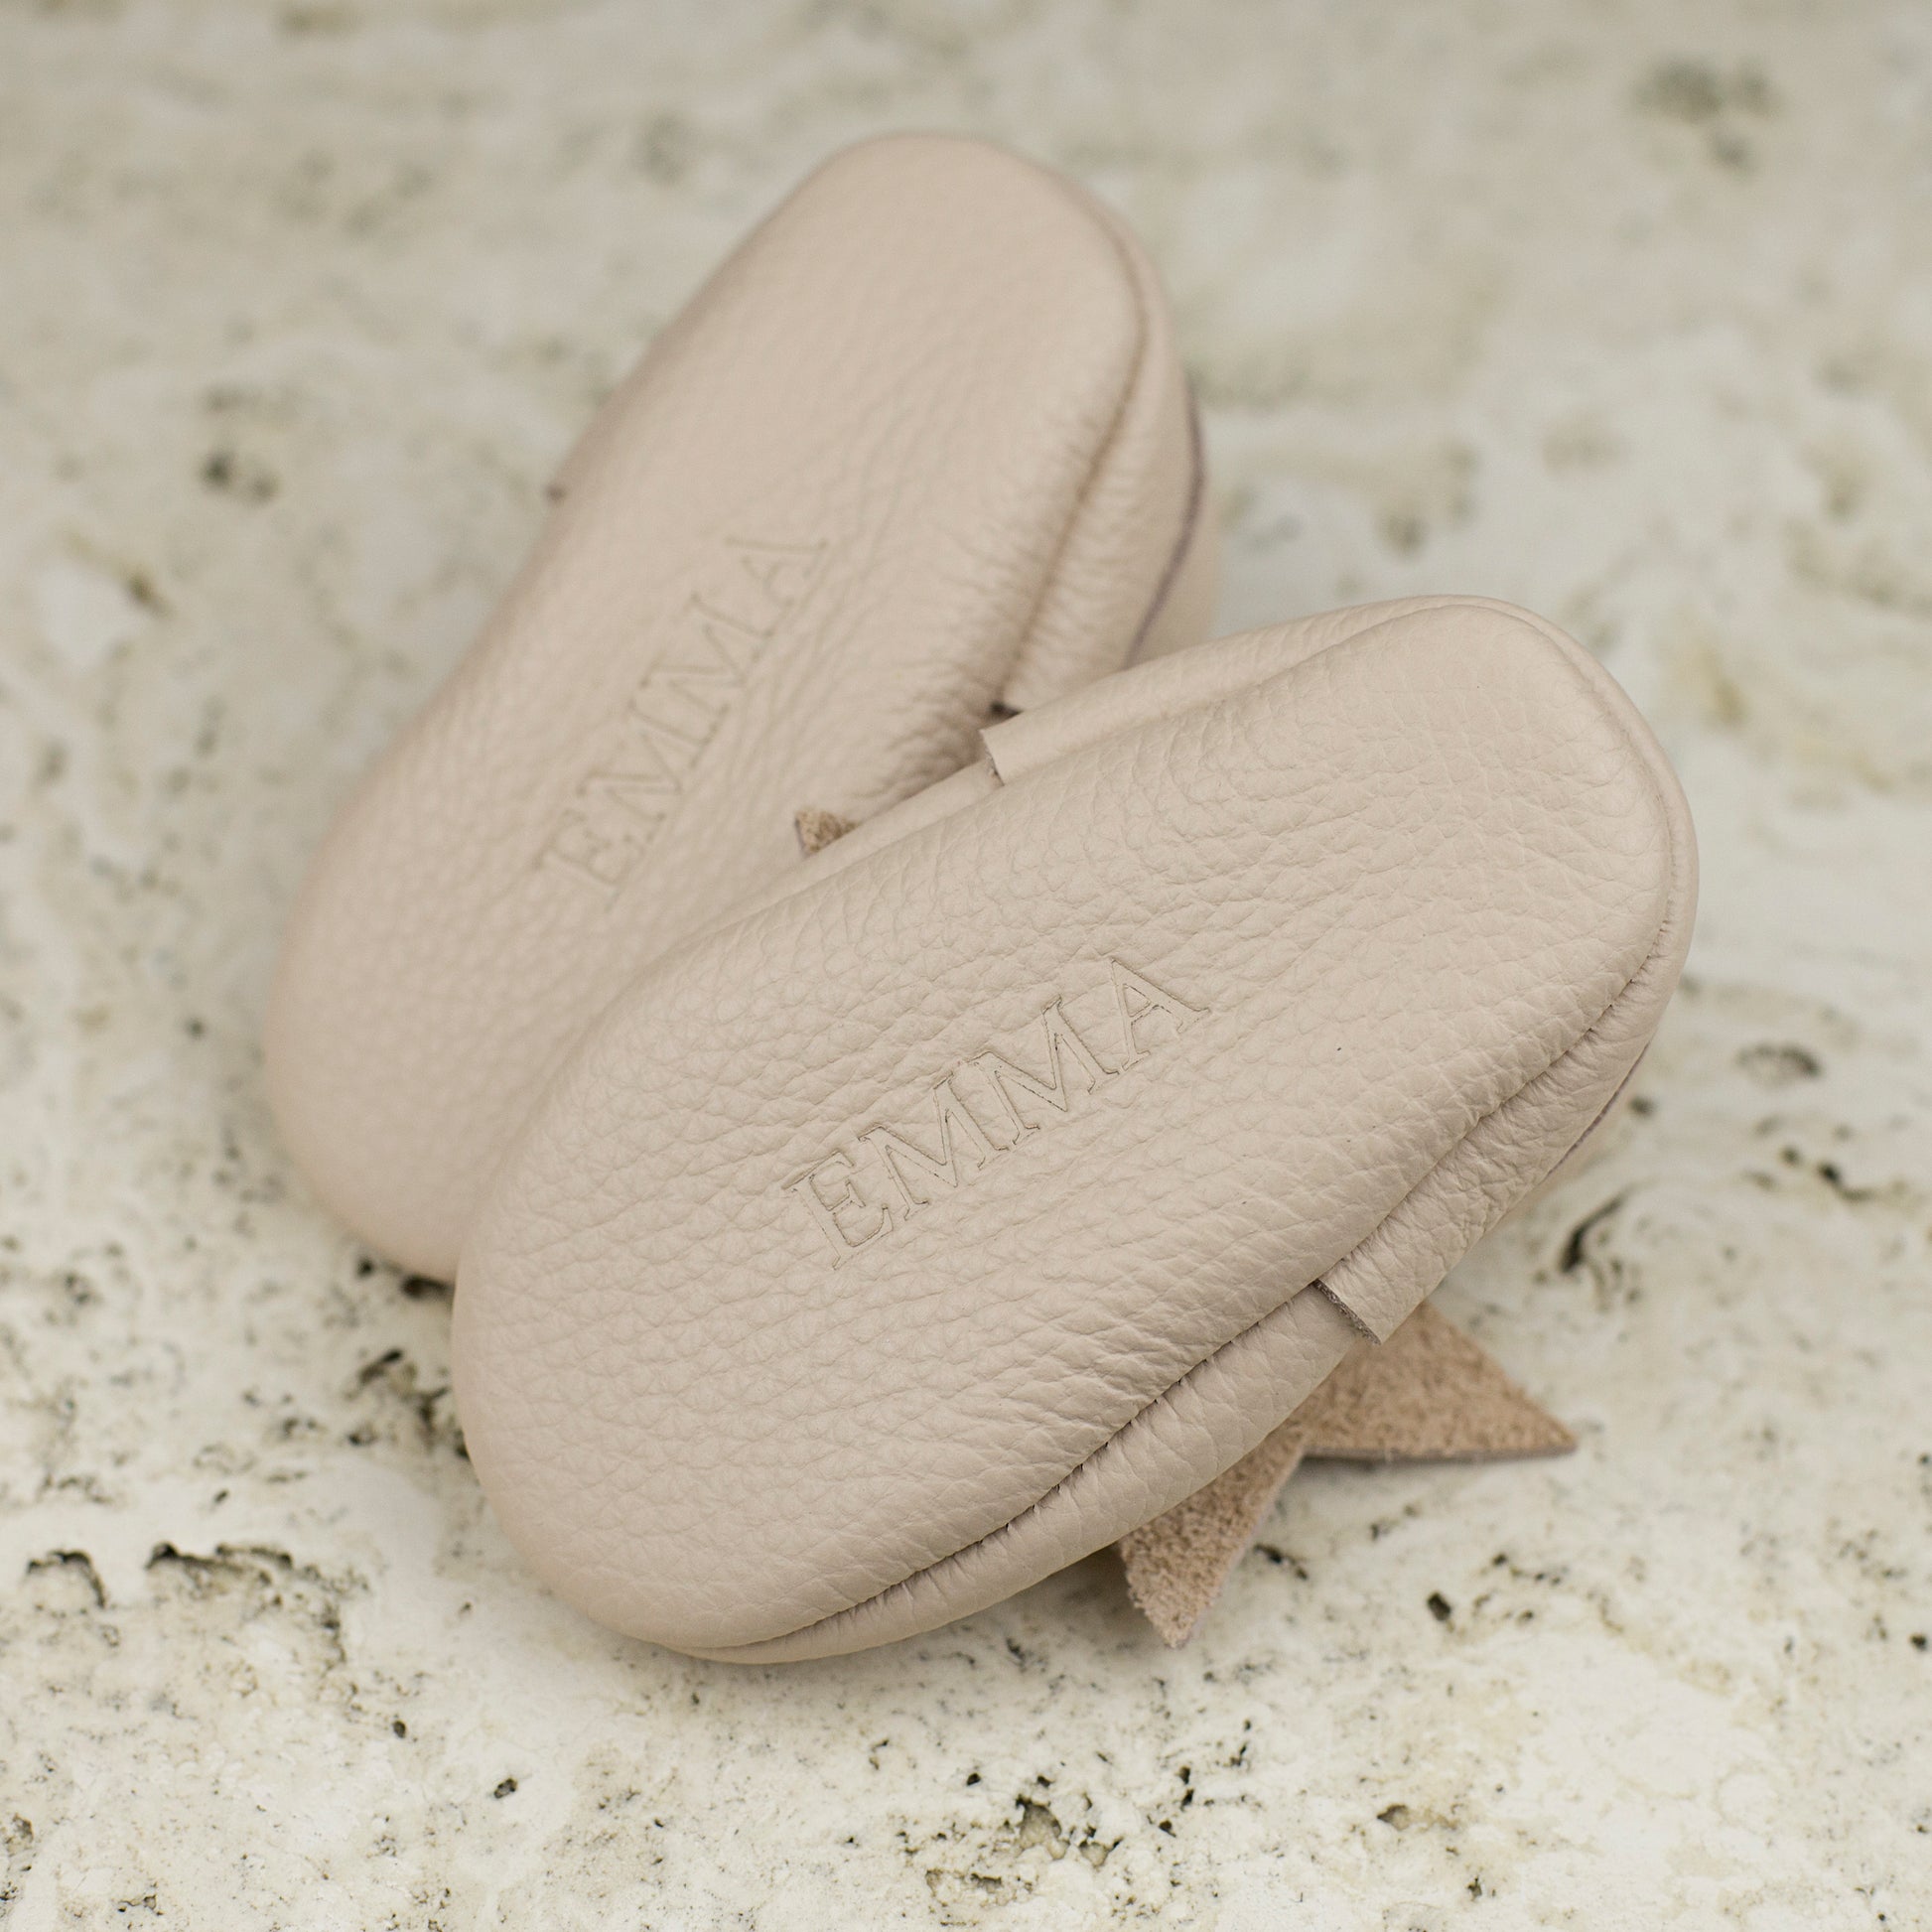 <img src="baby_shoes_personalization.jpg" alt="baby shoes personalization">